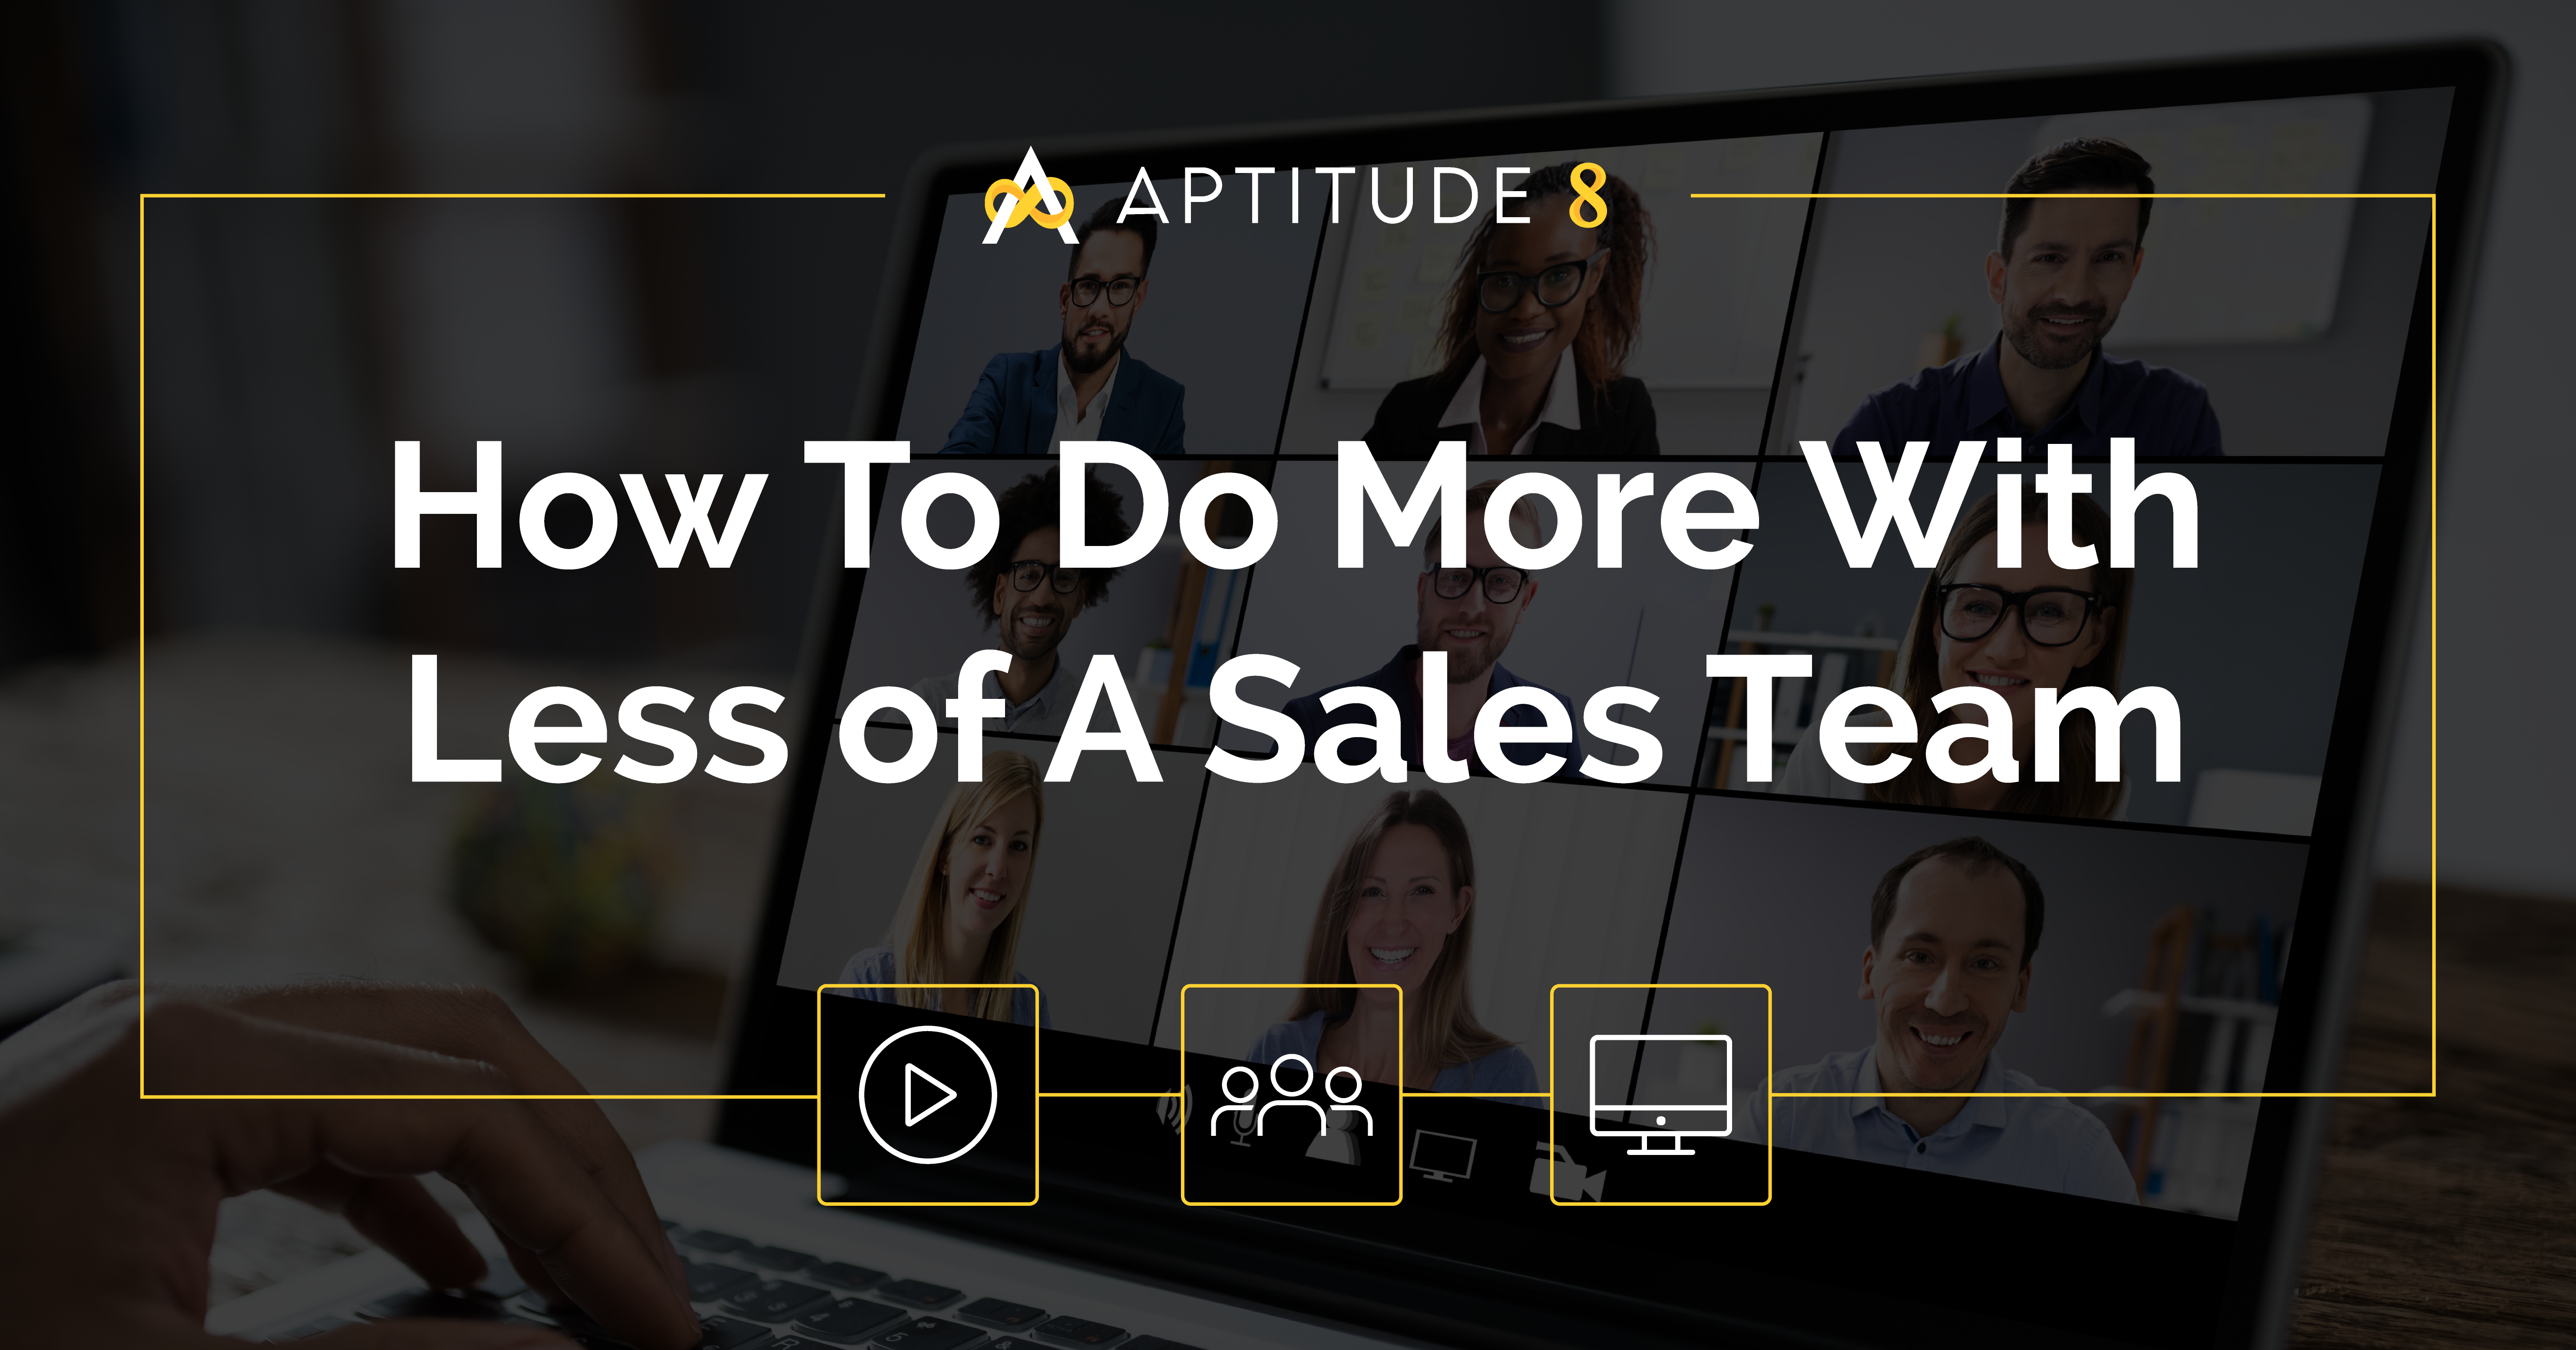 How To Do More With Less of A Sales Team